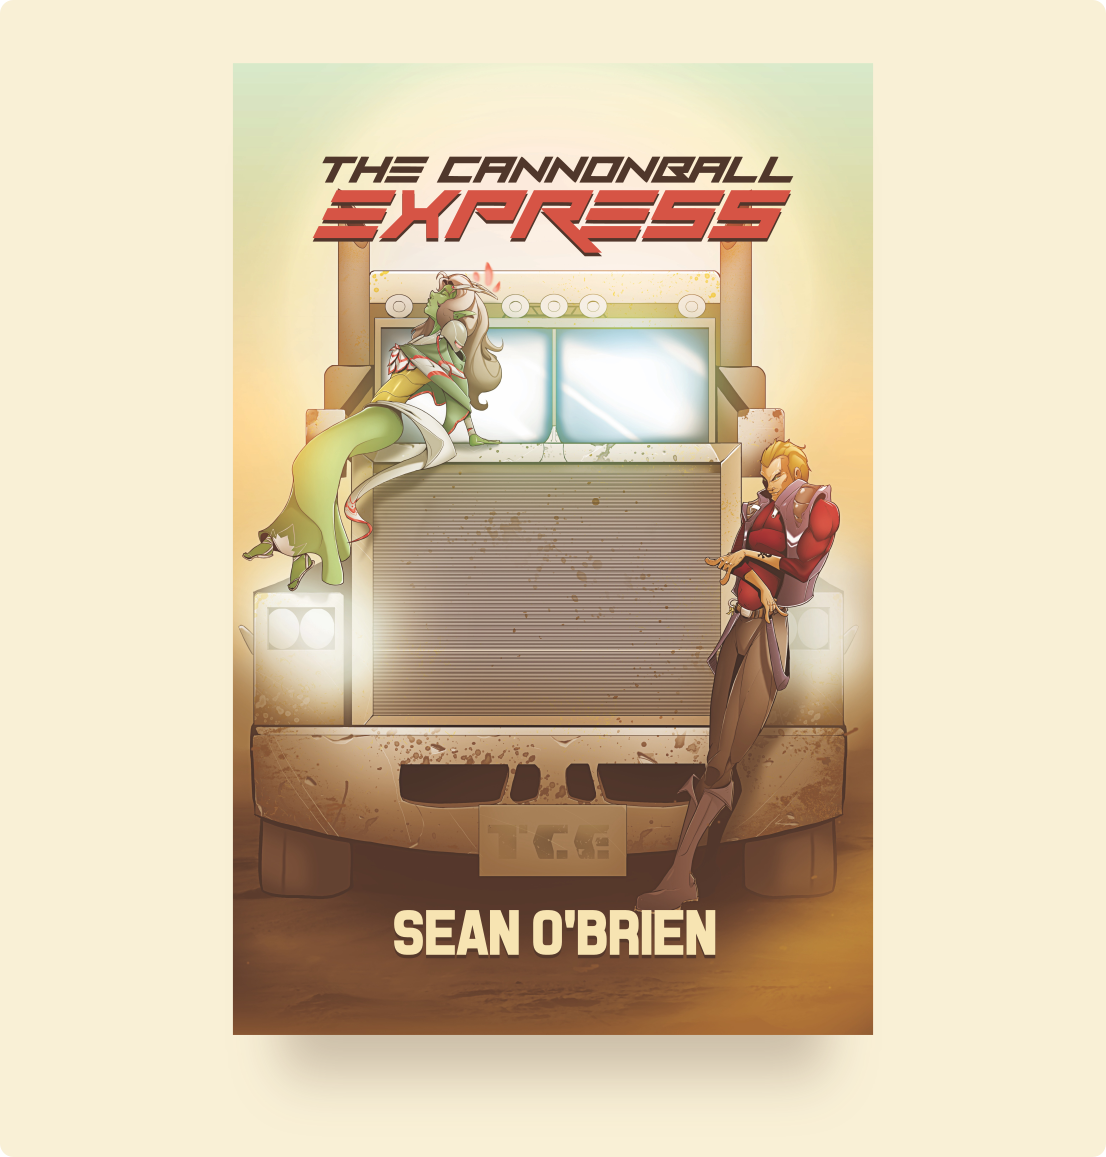 Book cover design for the Cannonball Express. Designed by Johnery